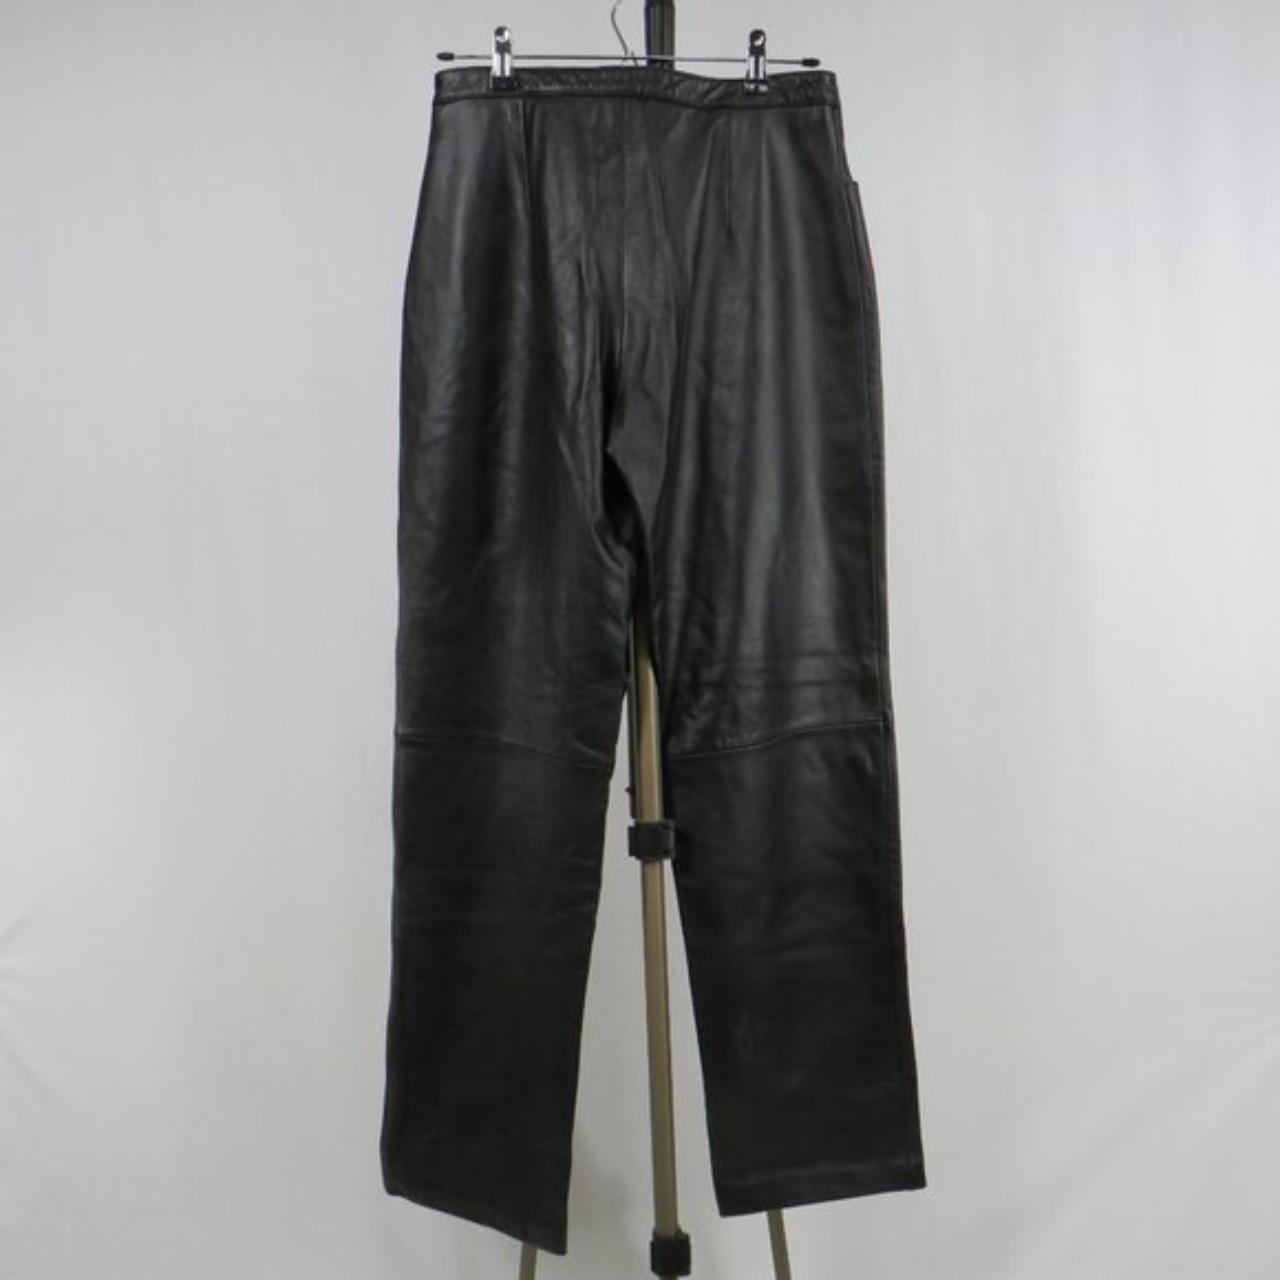 R2R black leather high-rise pants with 2 front... - Depop